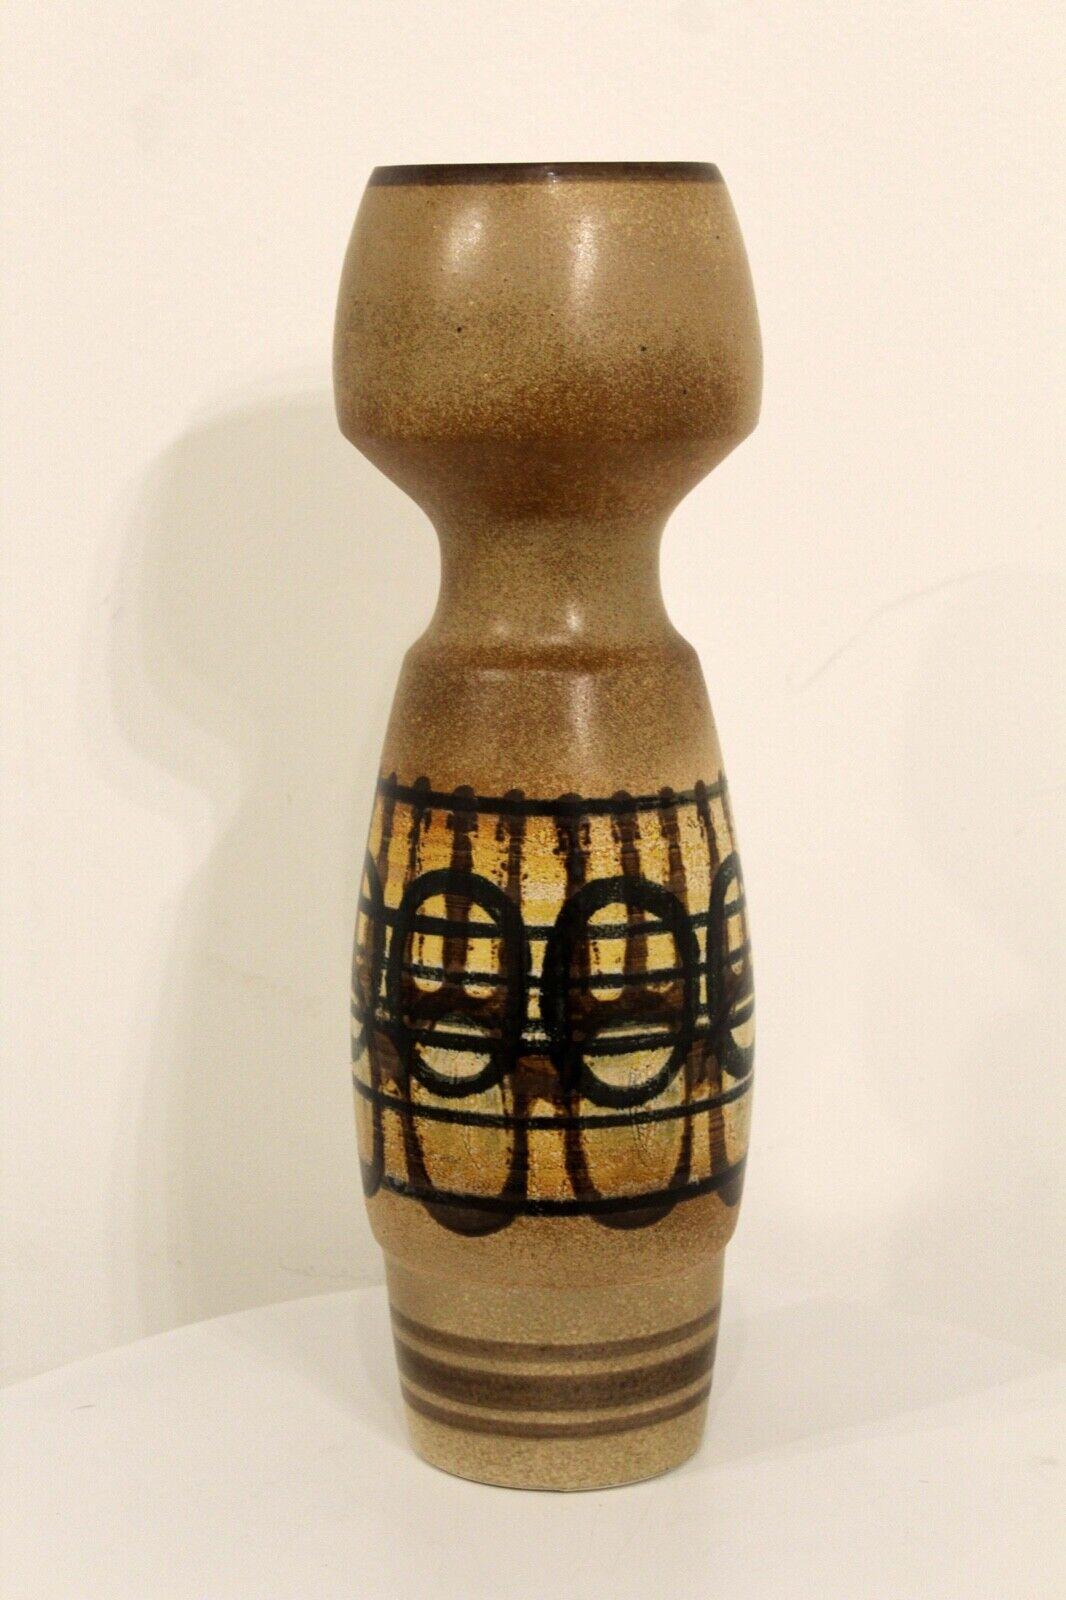 For your consideration is a beautiful Israeli stoneware Lapid vase. This vessel has a wonderful mid century vibe to compliment any pottery collection. Dimensions: 5.5